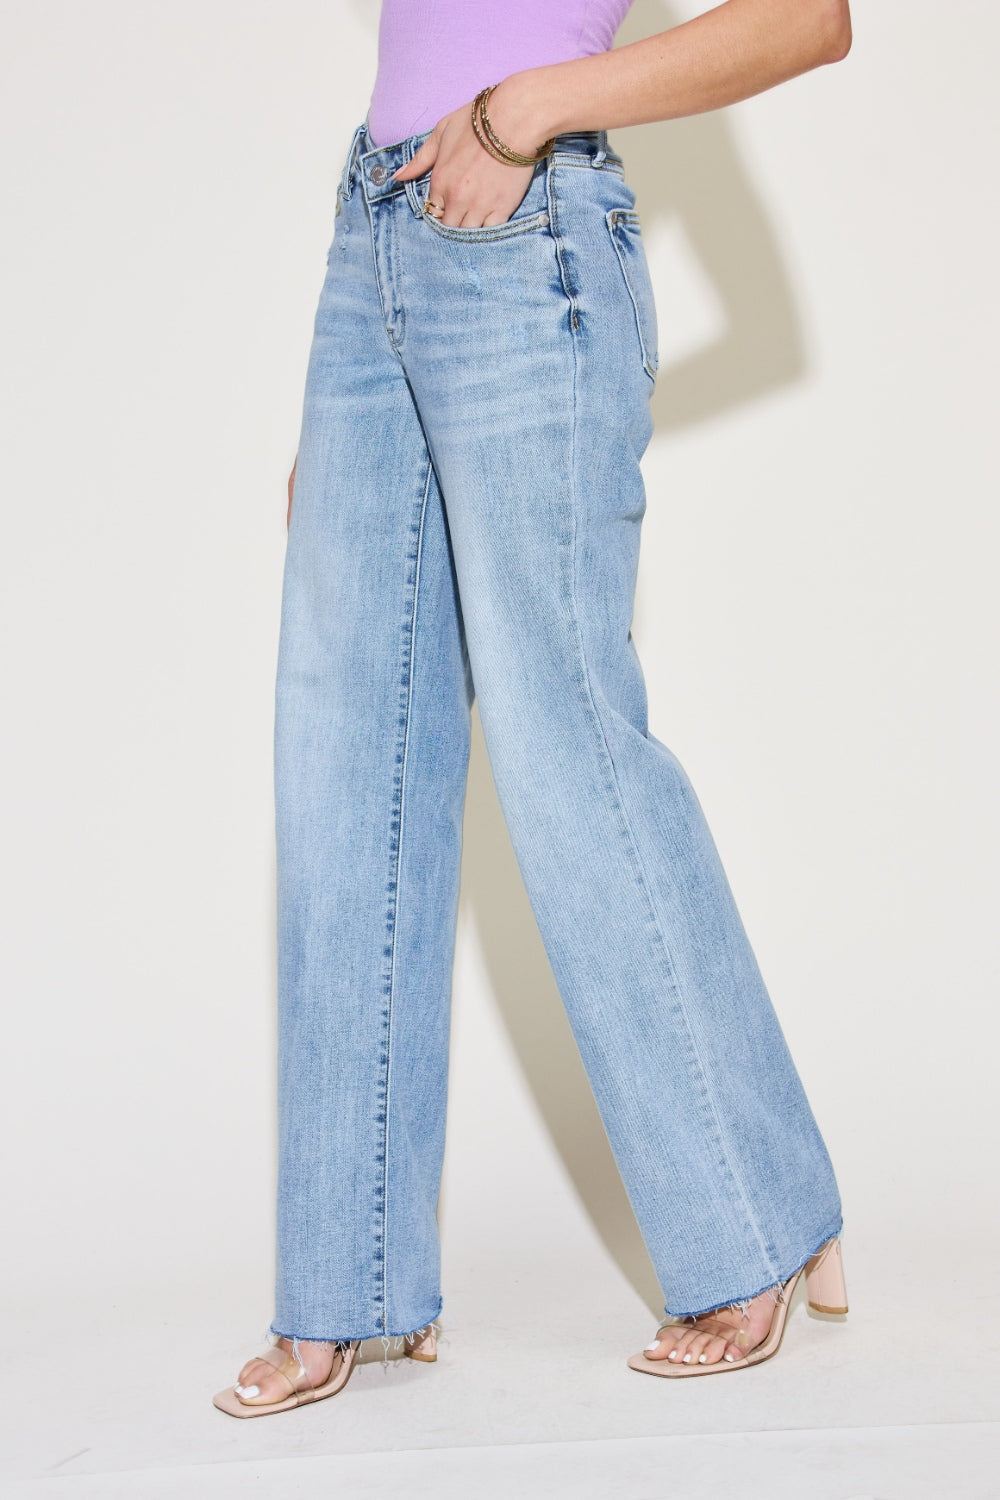 Judy Blue Straight Leg Light Wash Jeans - Inspired Eye Boutique